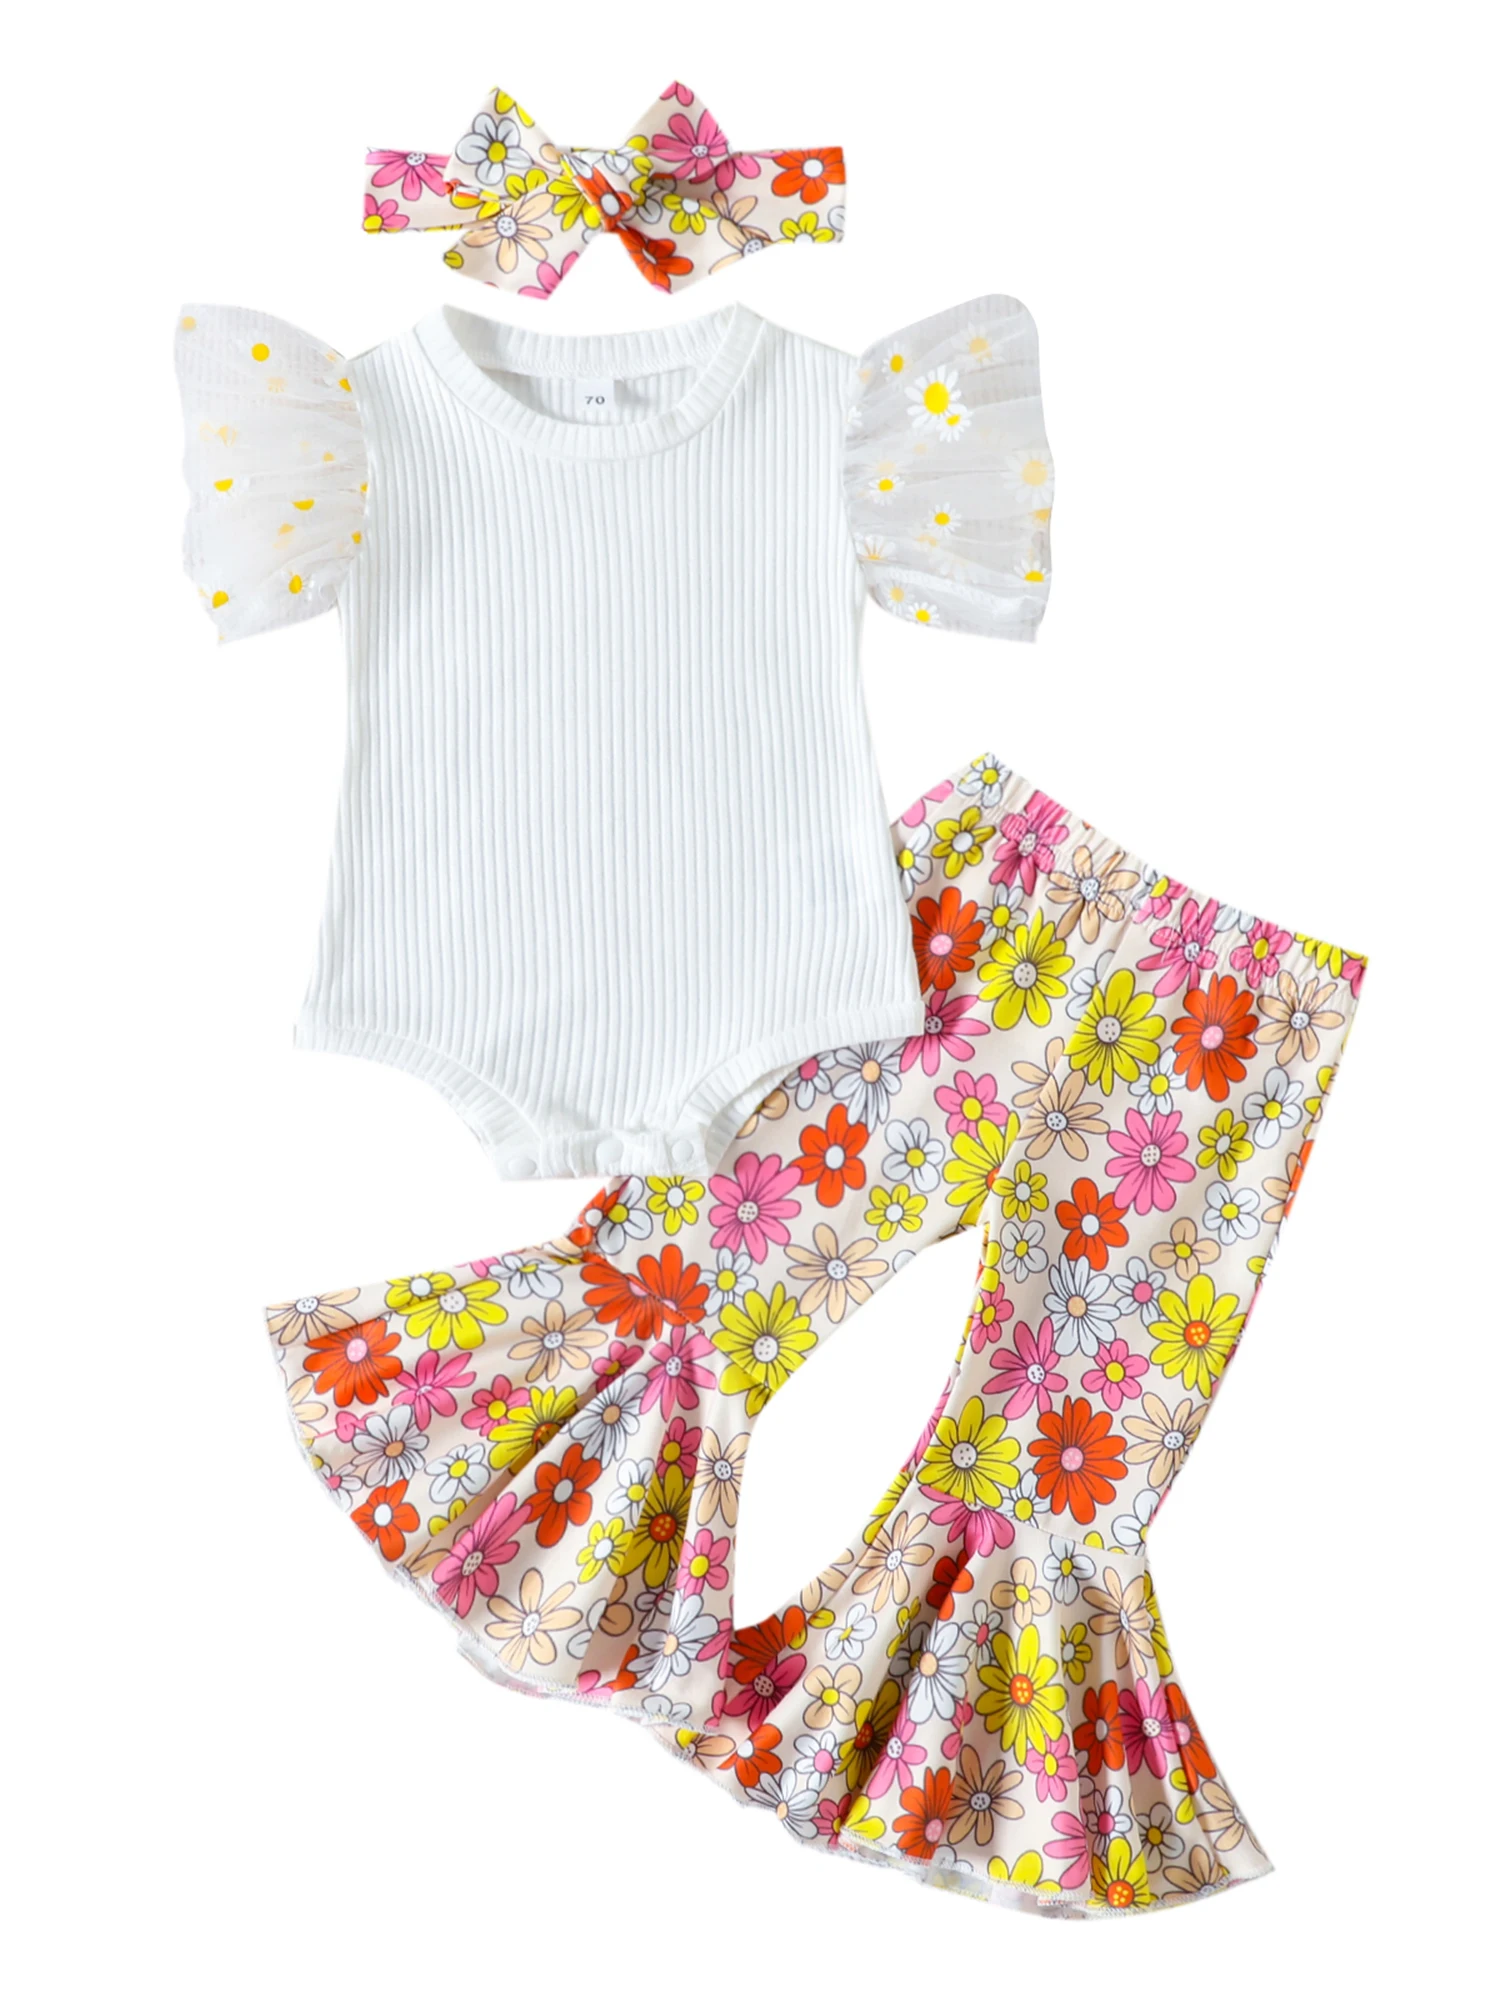 

Toddler Baby Girl Clothes Half First Birthday Outfit Daisy Mesh Sleeve Rib Romper Floral Flared Bell Bottoms Pants